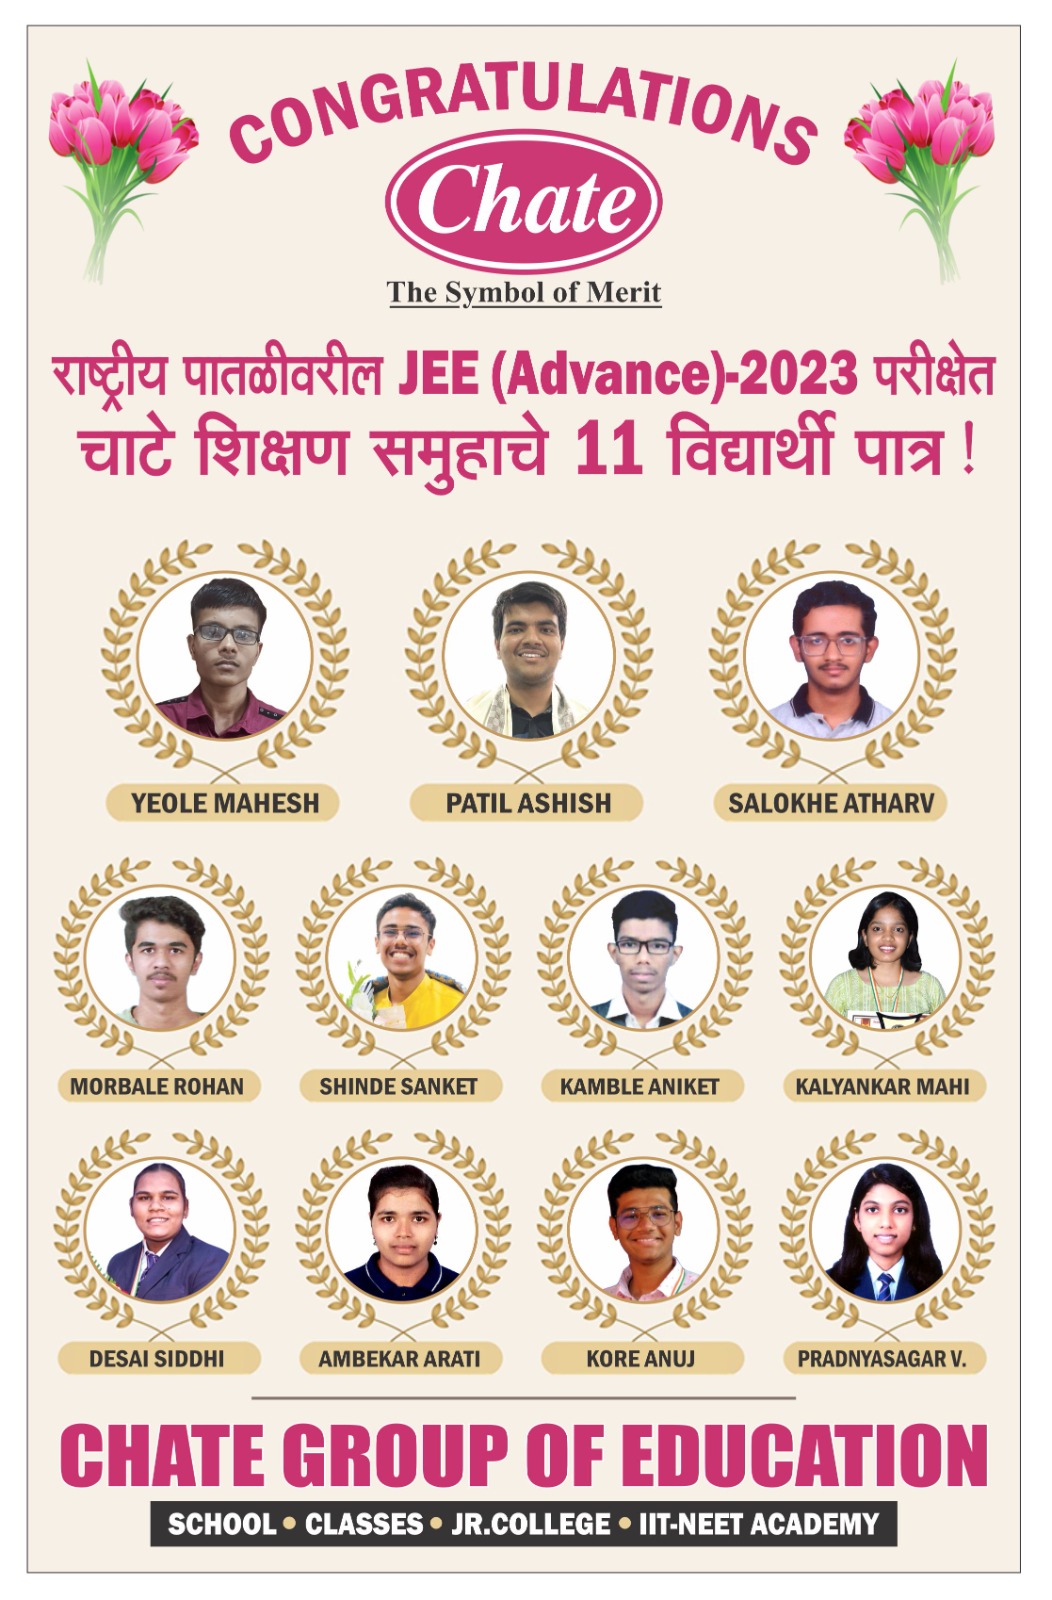 11th students of Chate Education Group are successful in JEE Advanced exam